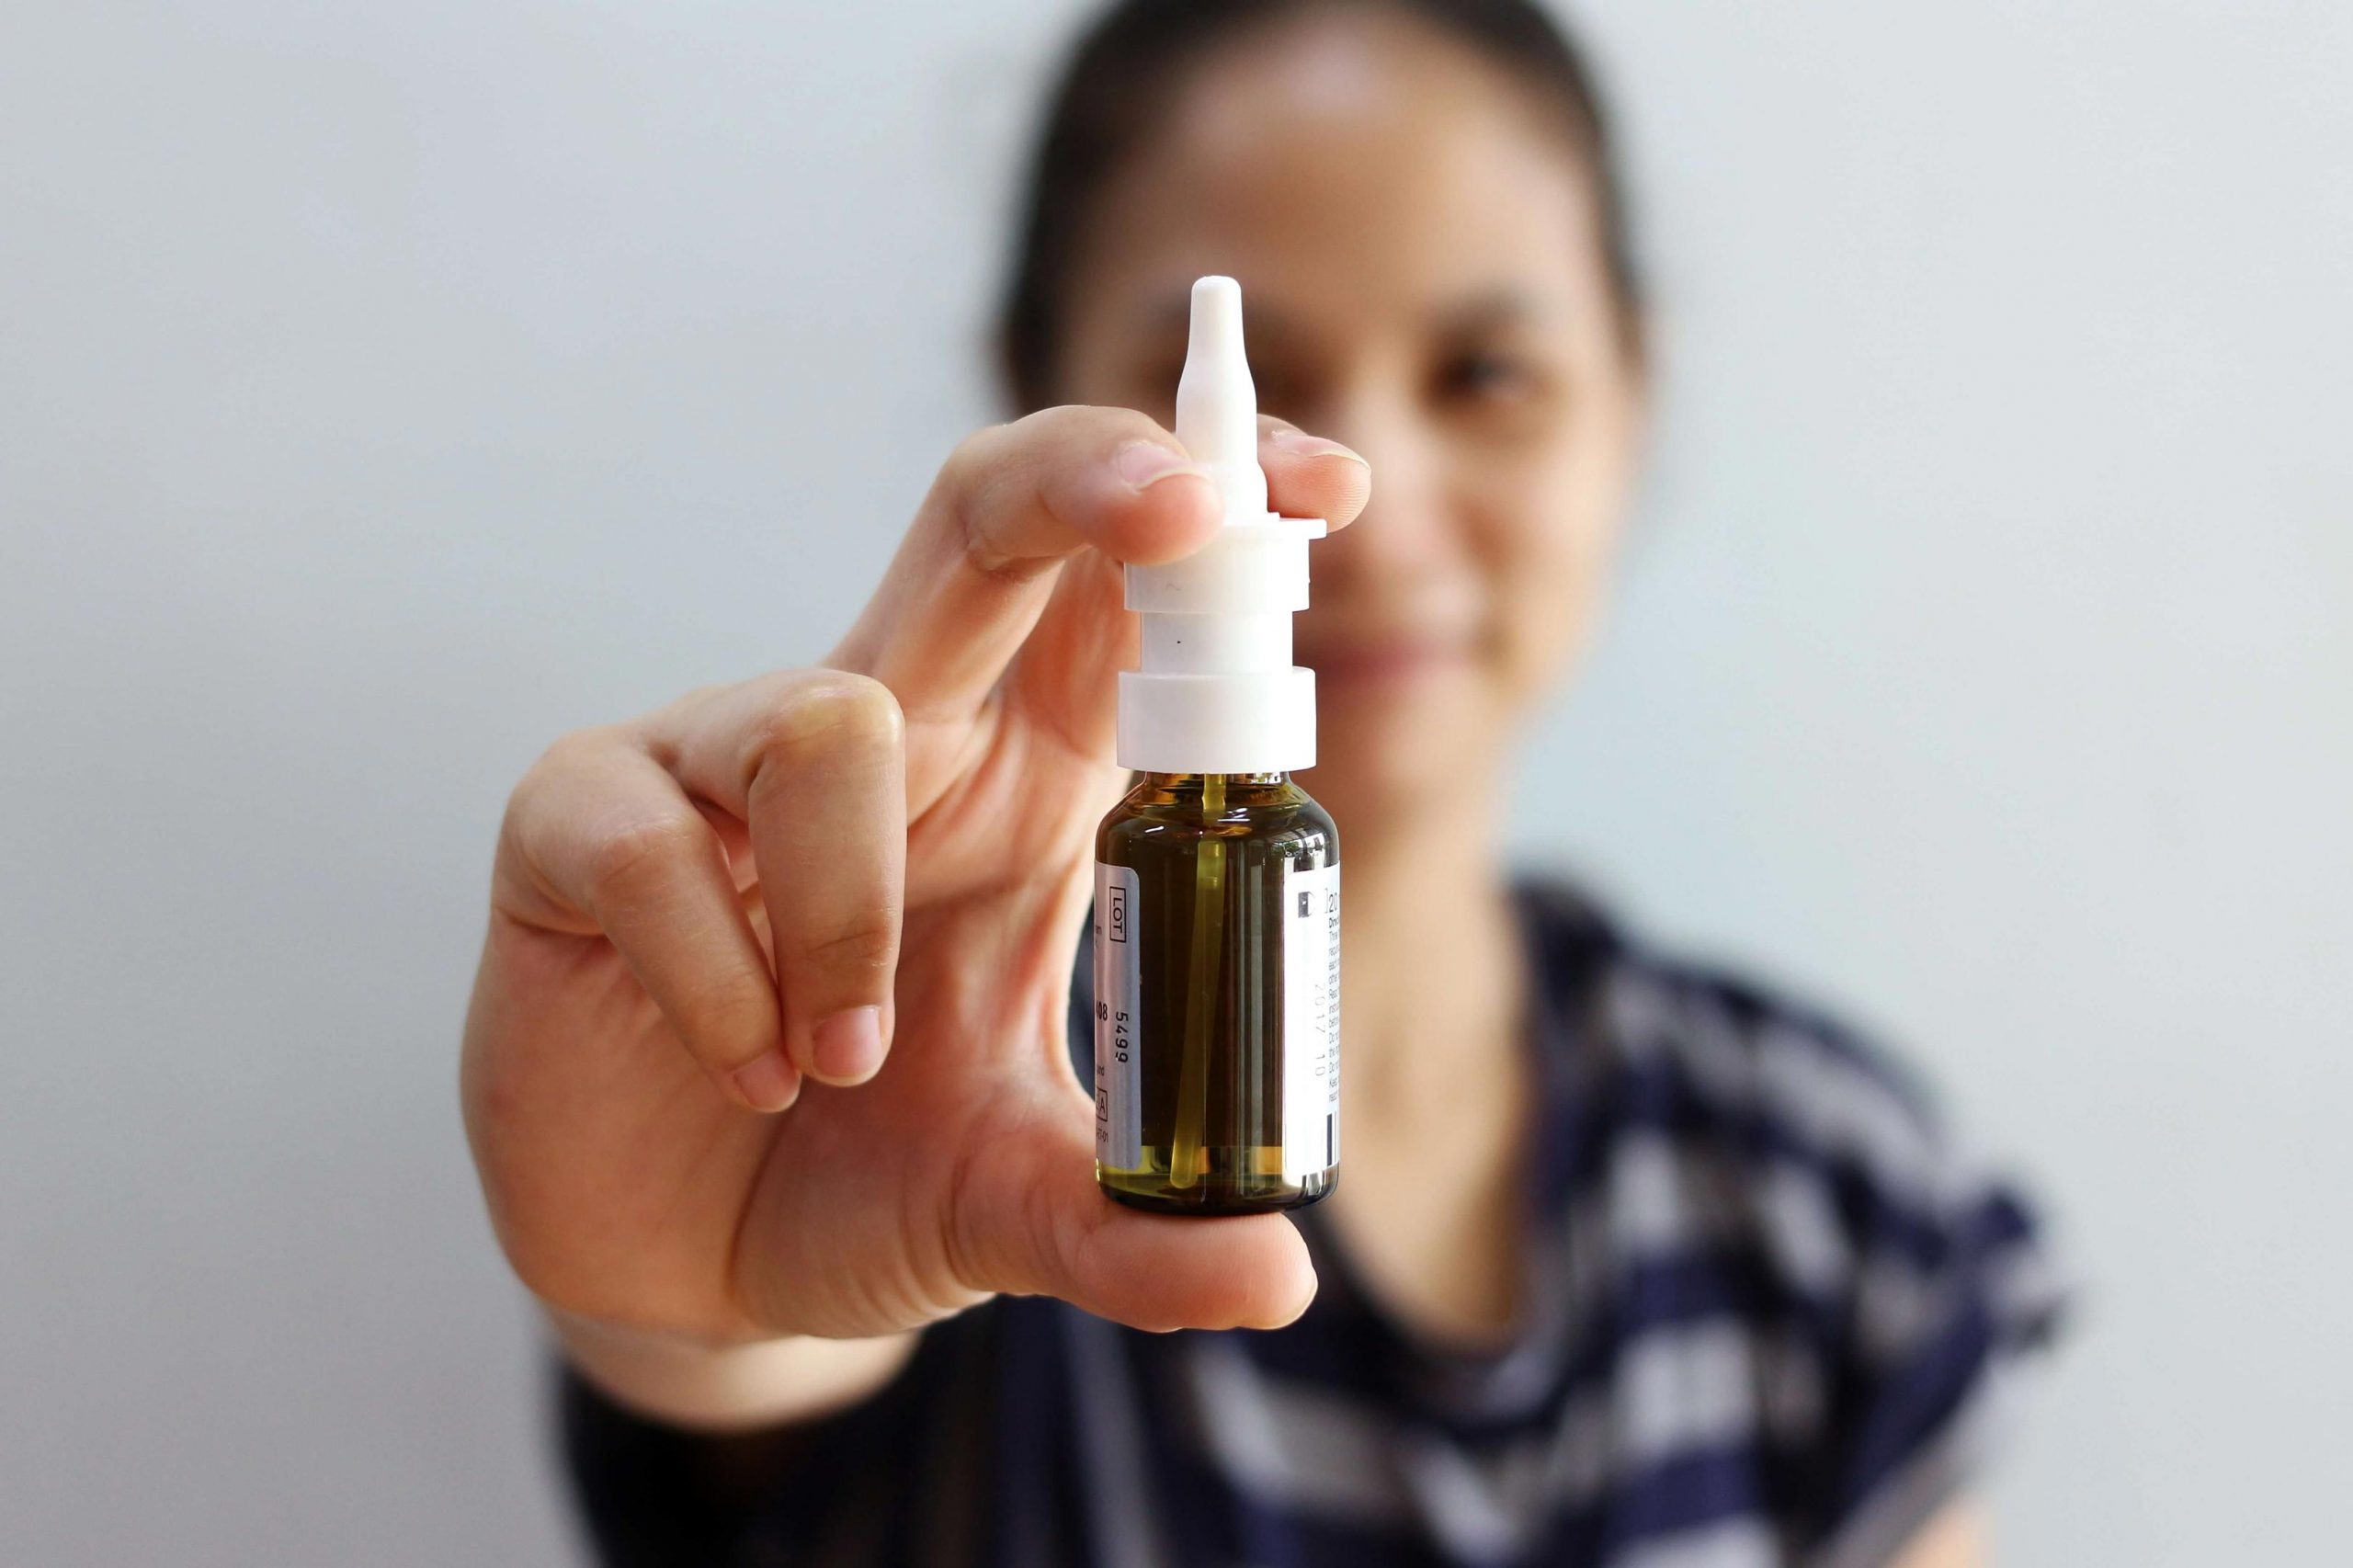 Nasal Spray May Prevent Coronavirus Infection in People Exposed to COVID-19 